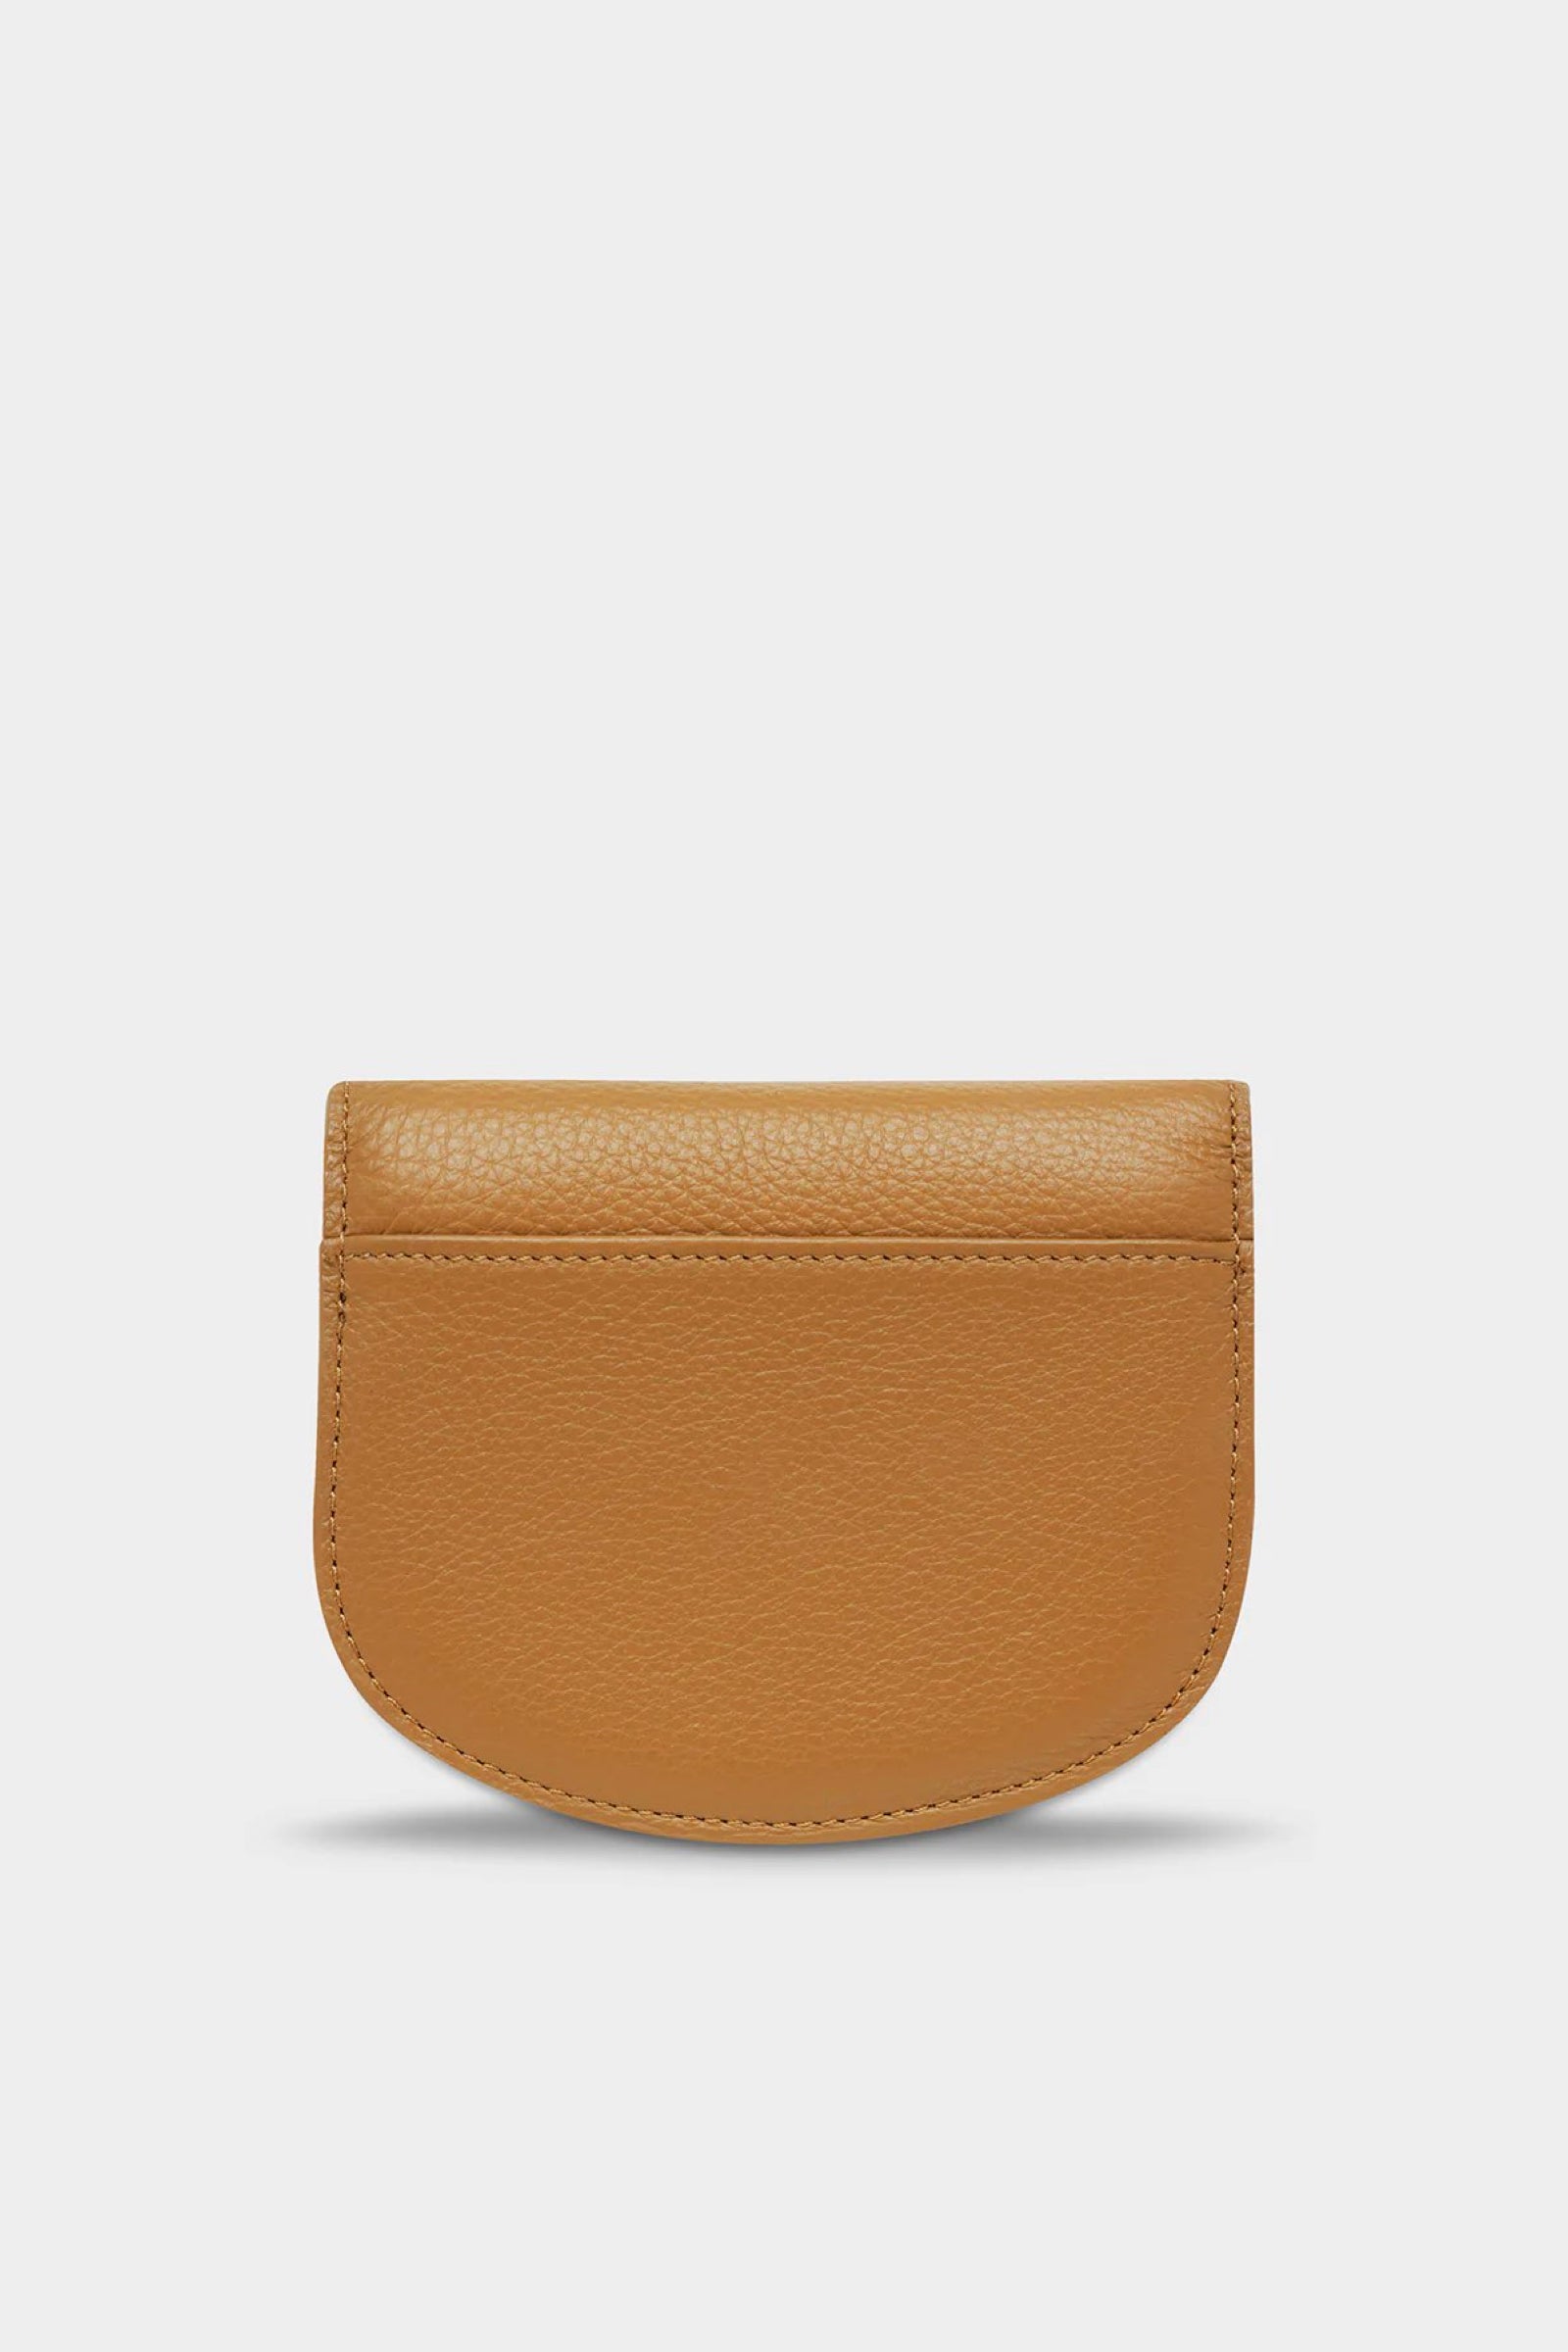 US FOR NOW WALLET - TAN